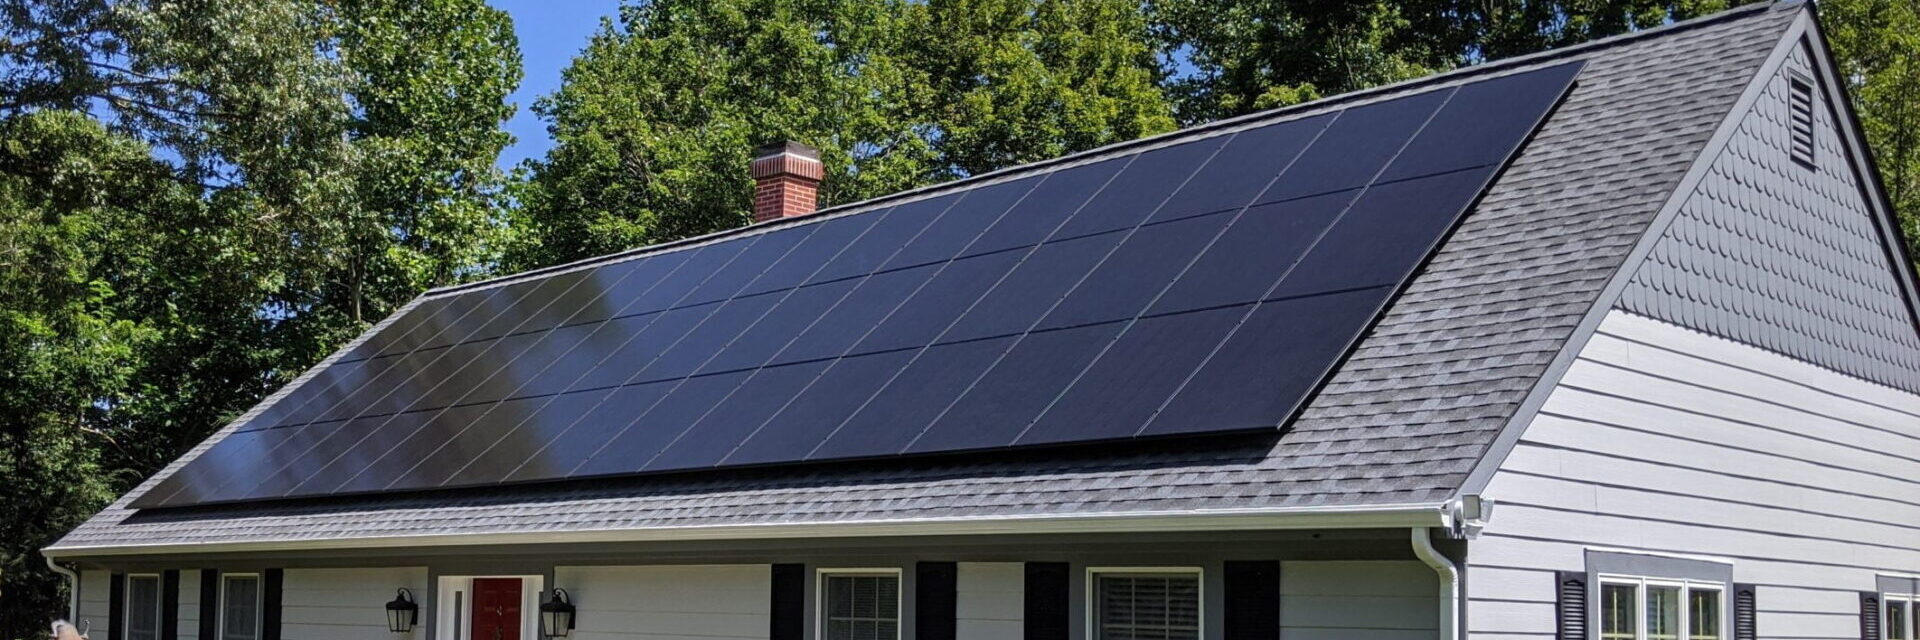 Rooftop solar panels installed on home in Culpeper VA